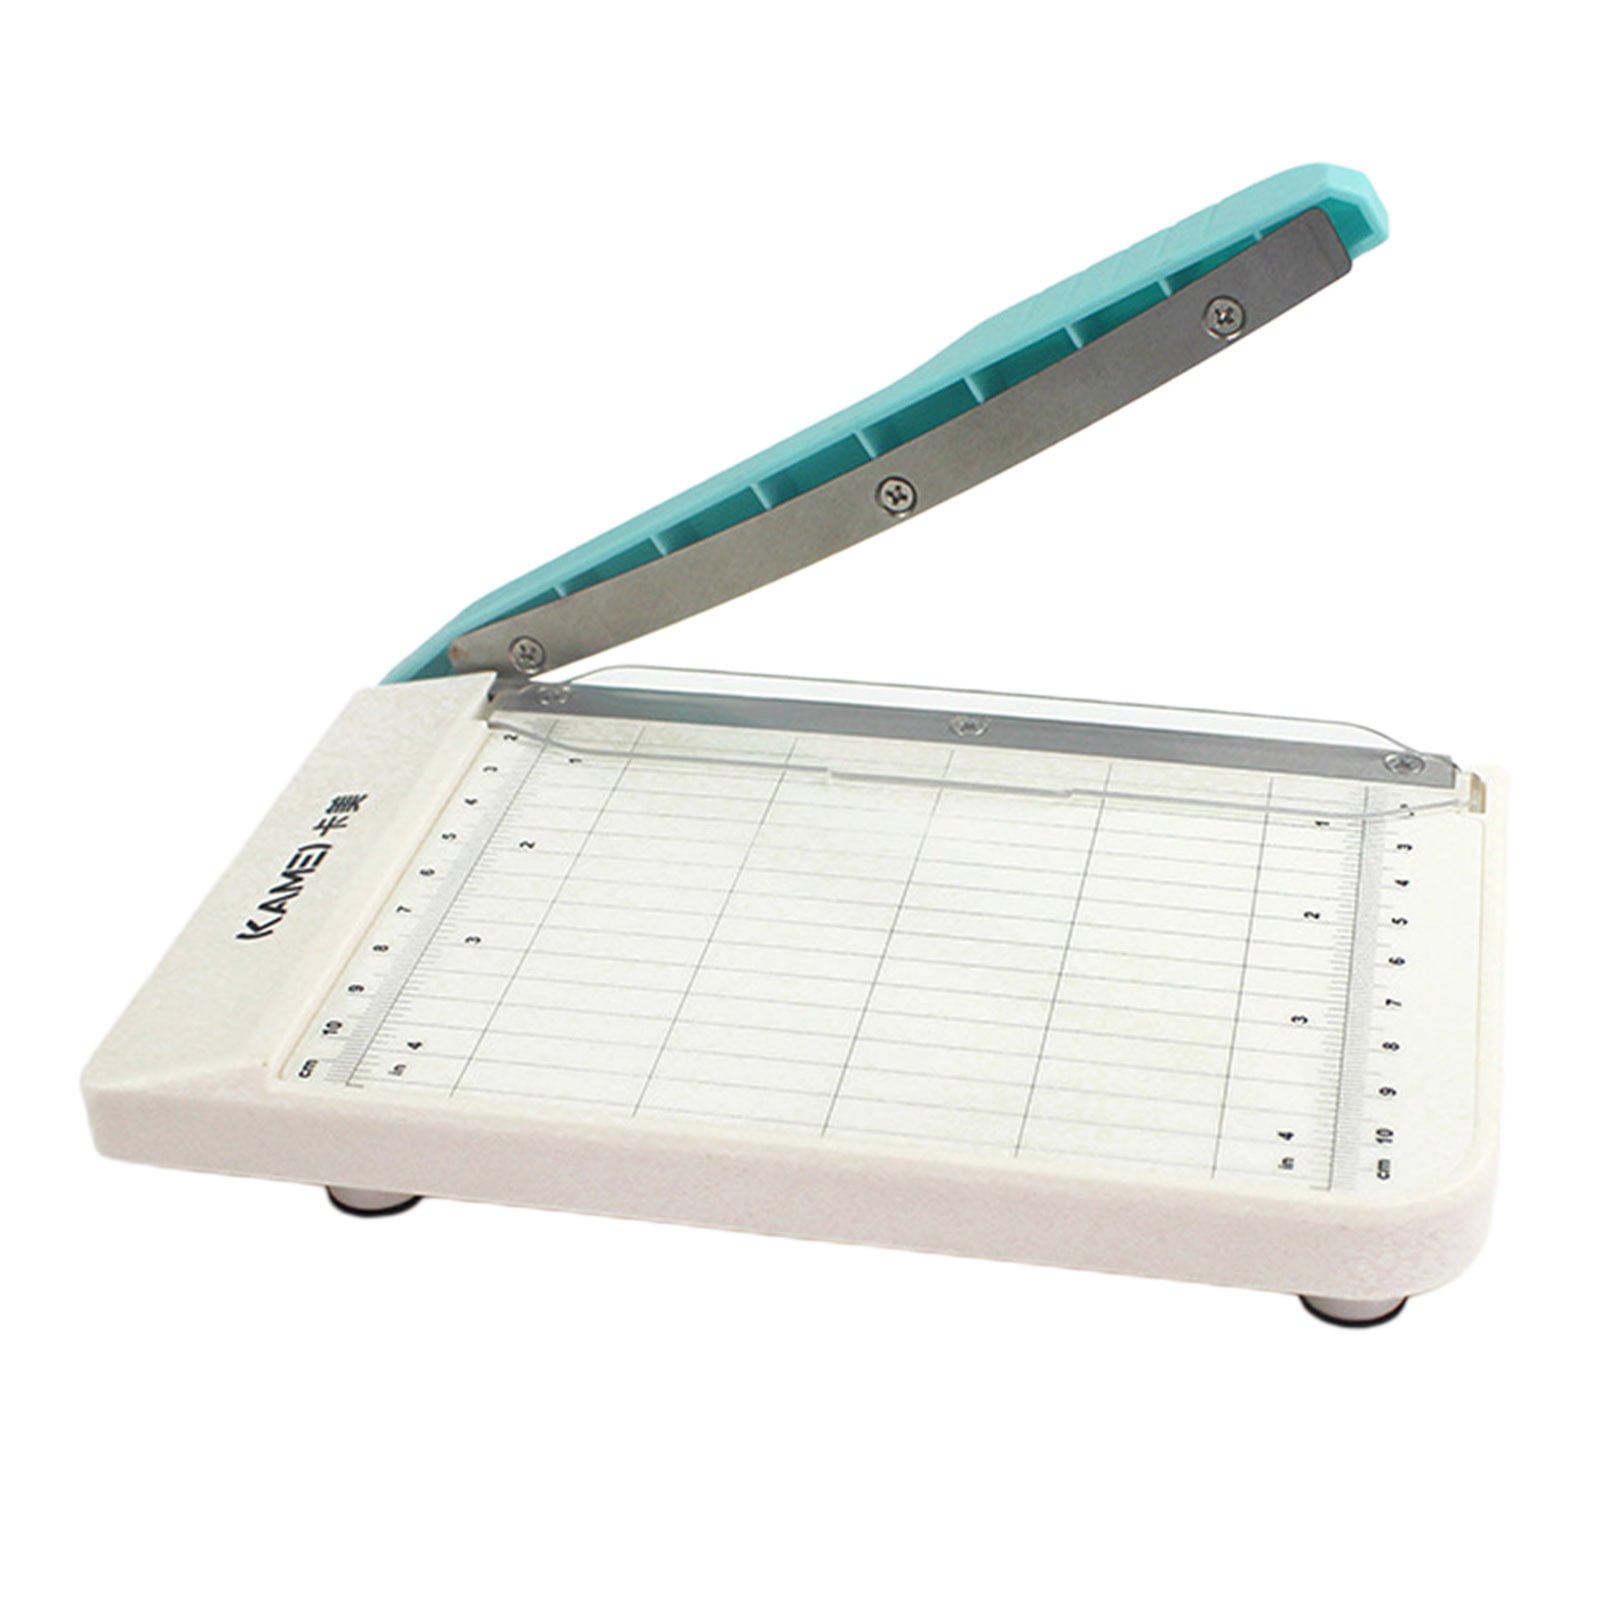 Mini A4 to B7 Paper Cutter No-touch Scrapbooking Paper Guillotine Paper Trimmer